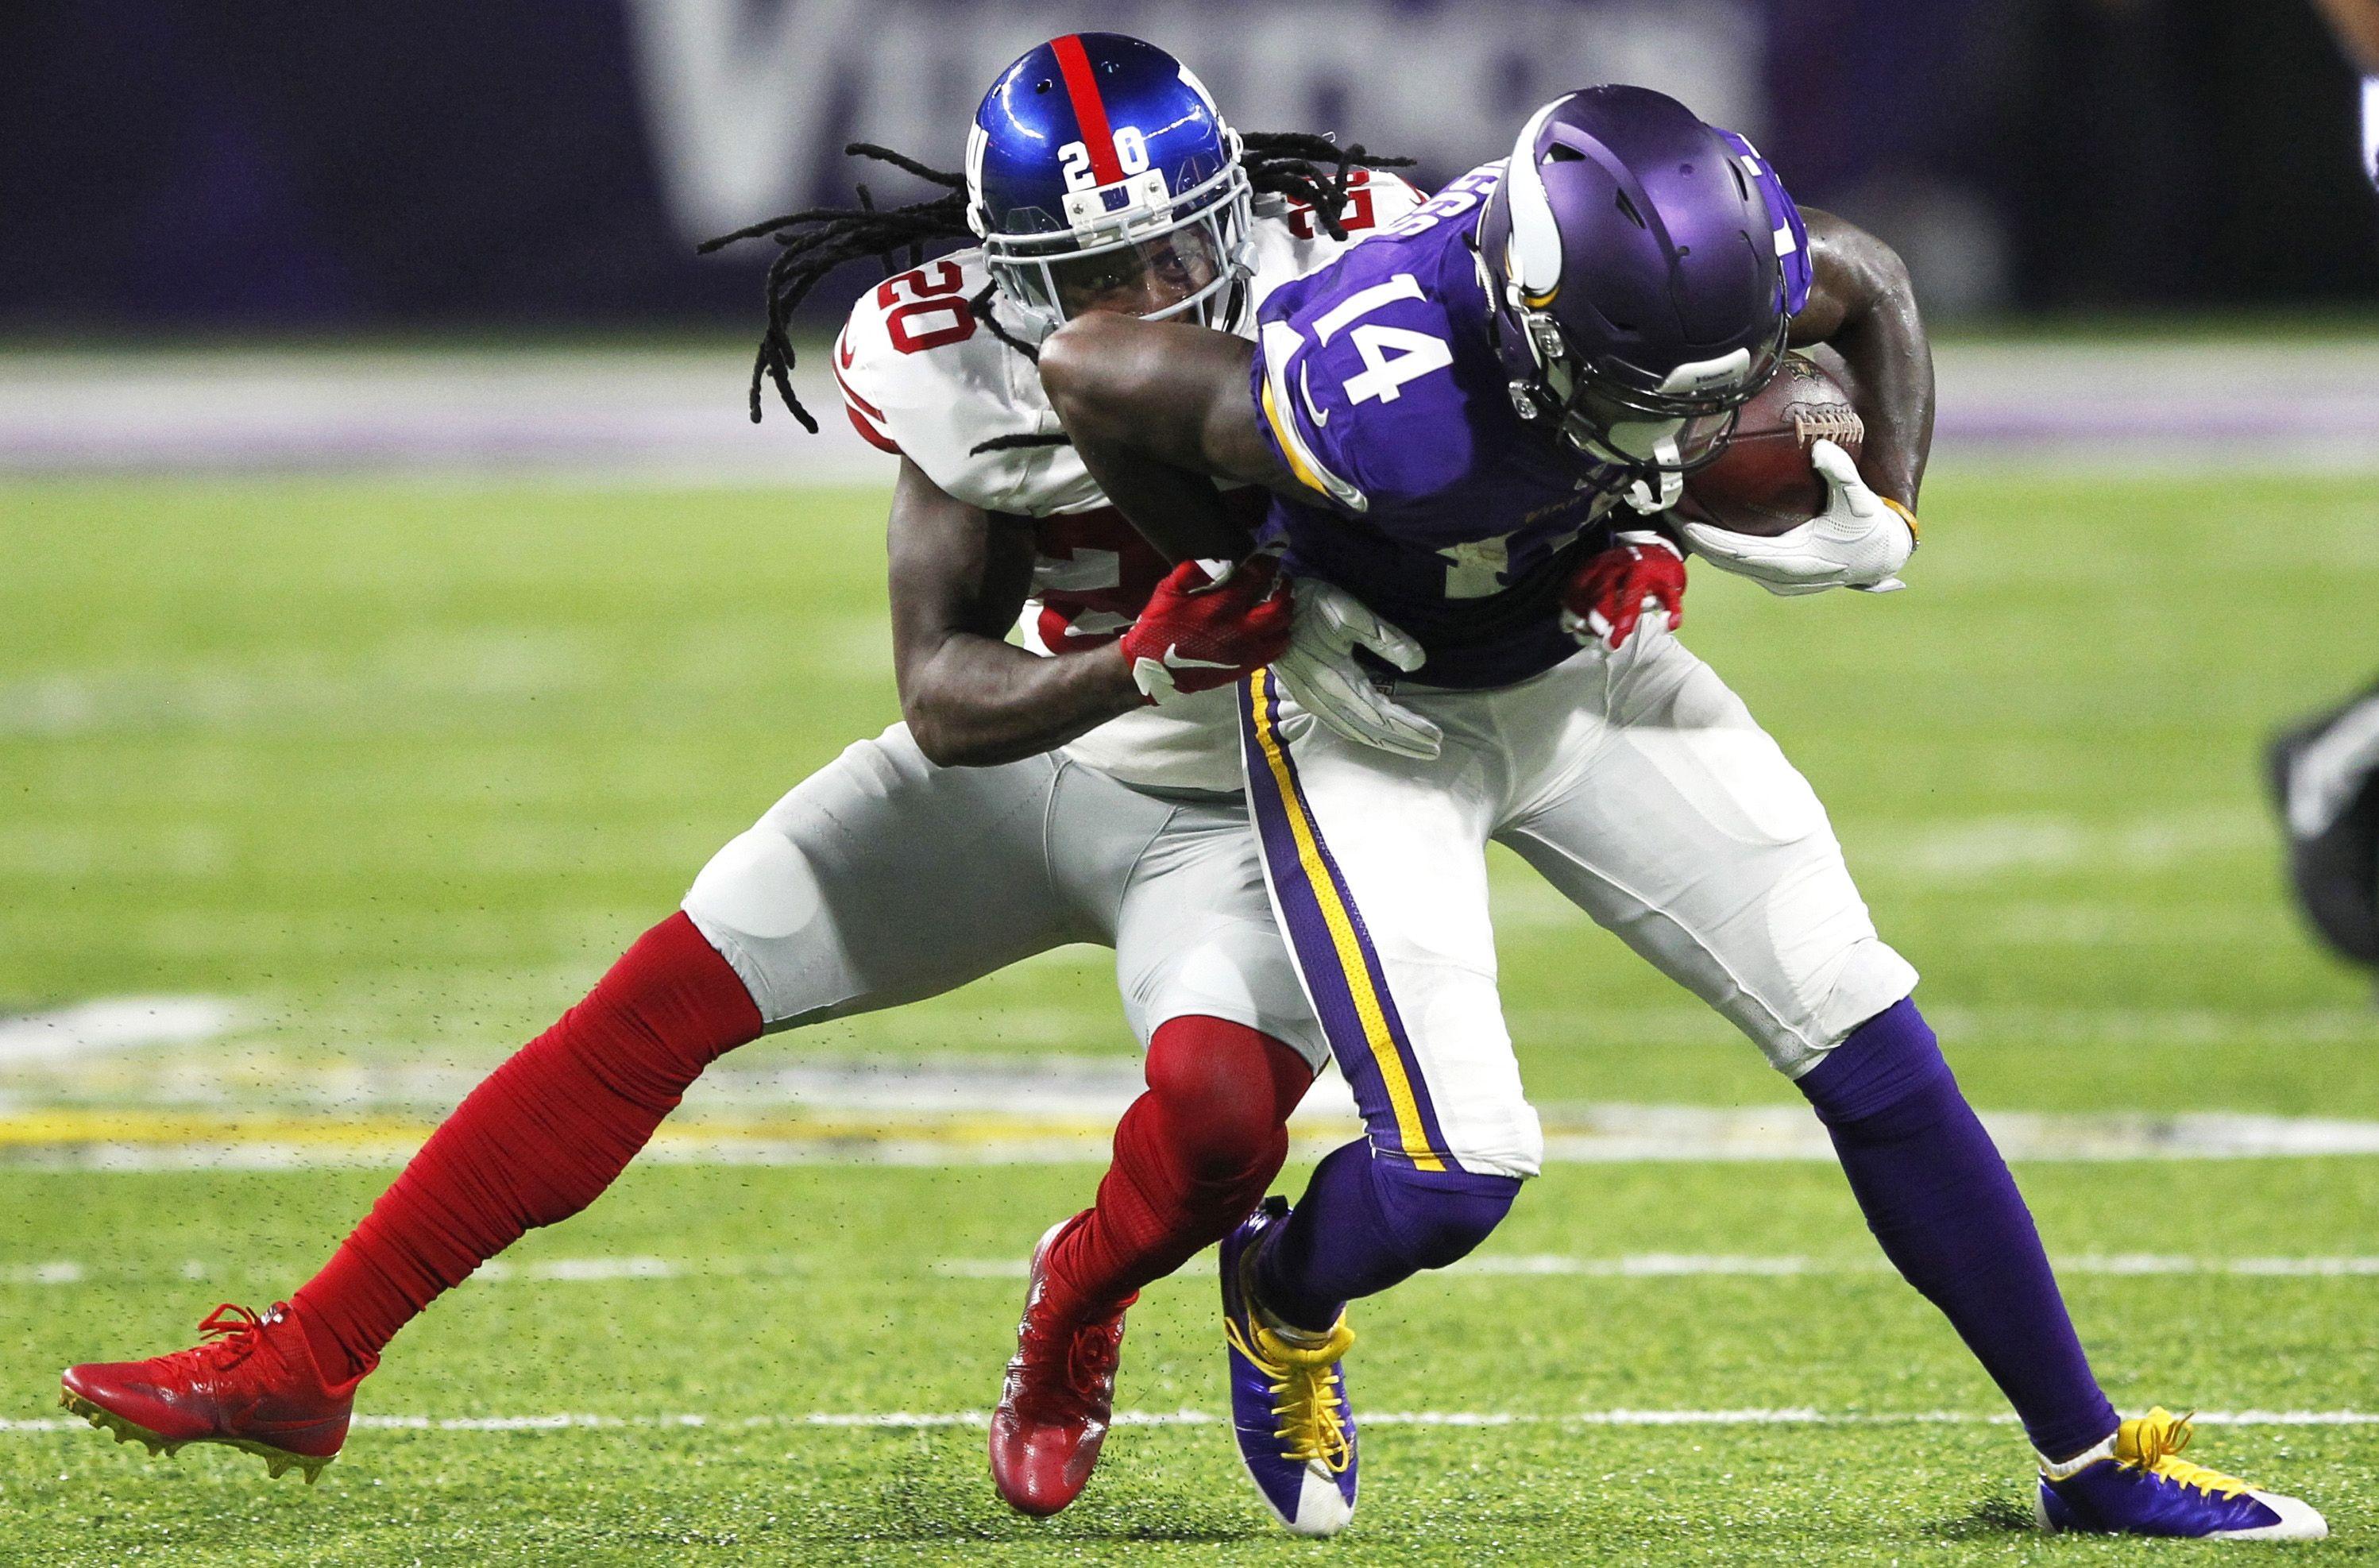 Vikings: Stefon Diggs doubtful, Andre Smith out